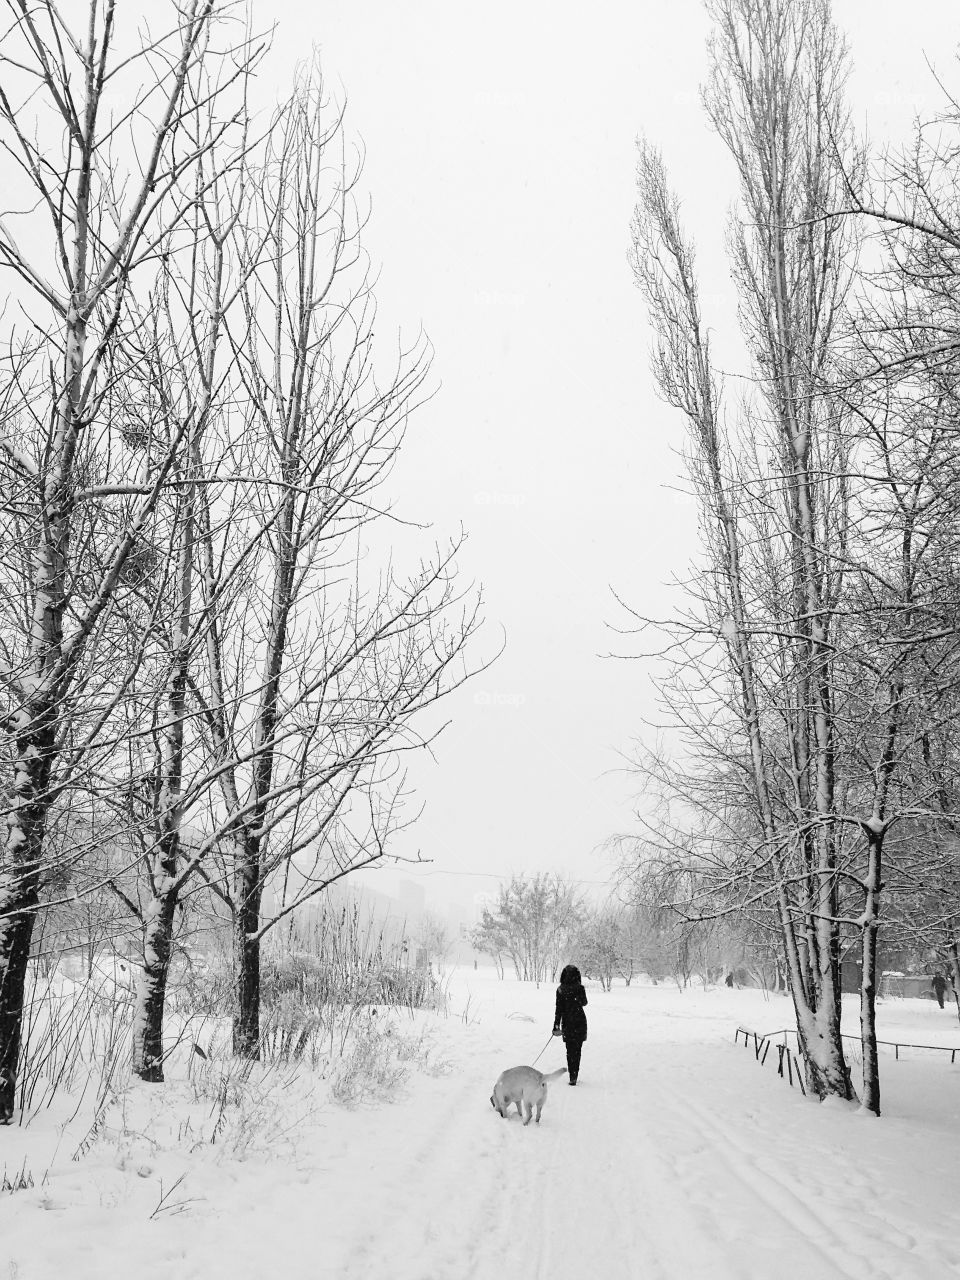 Woman walking with a dog in winter 